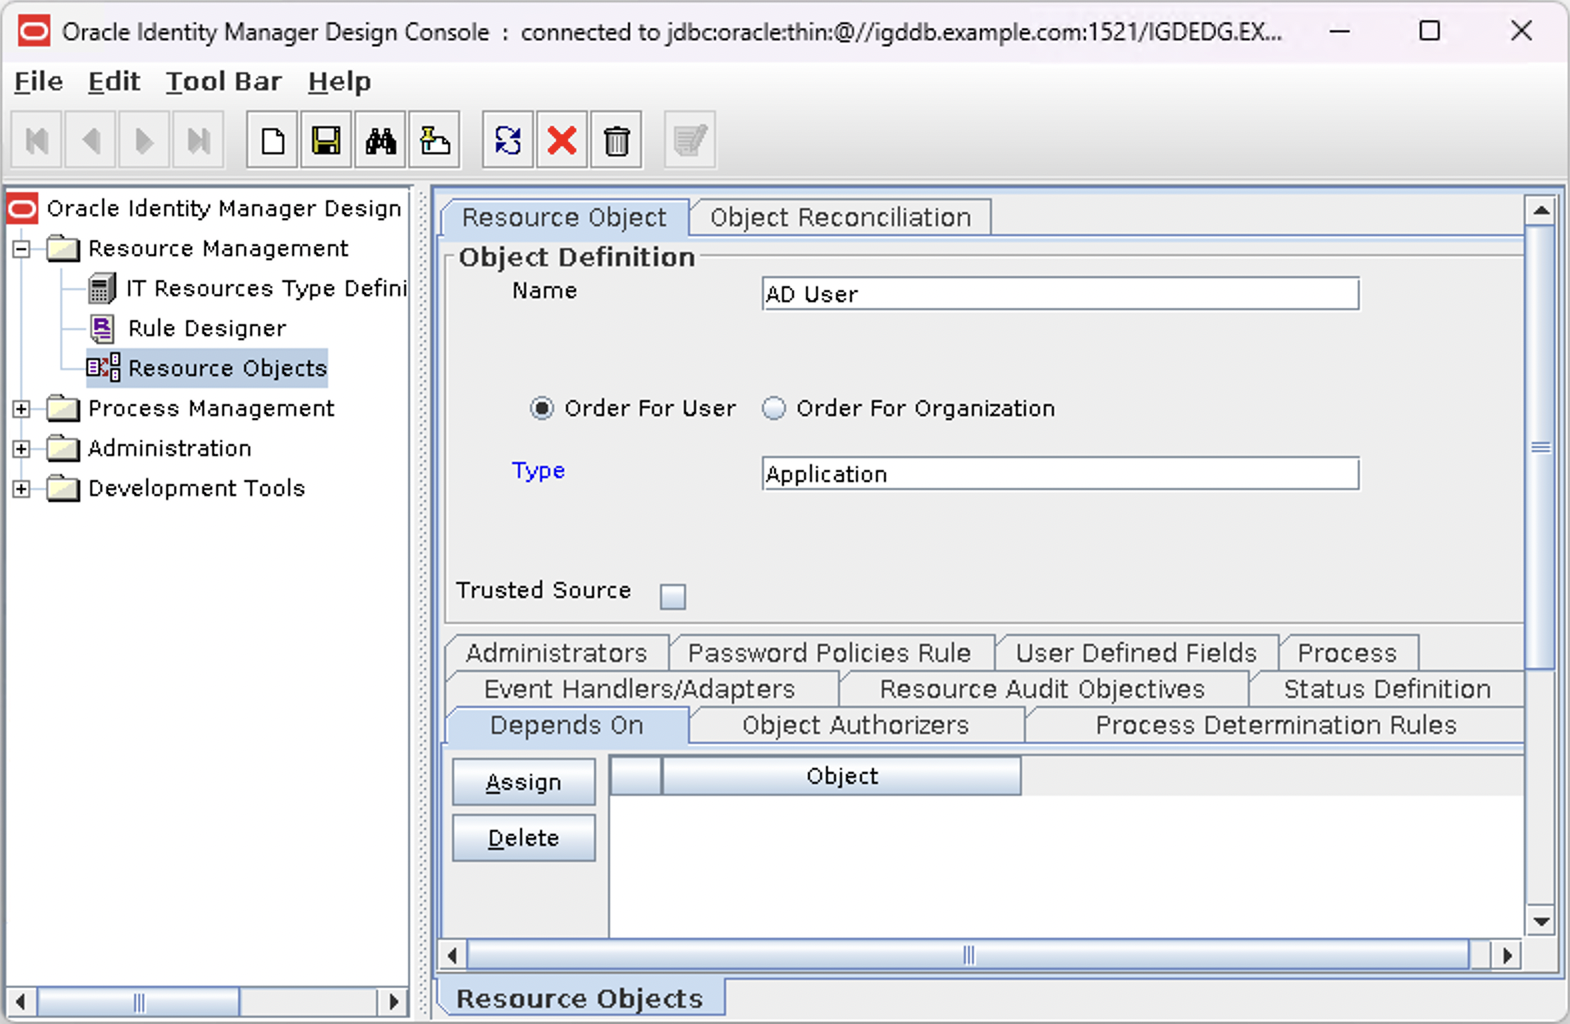 Screenshot of an Oracle Identity Manager Design Console Resource Object